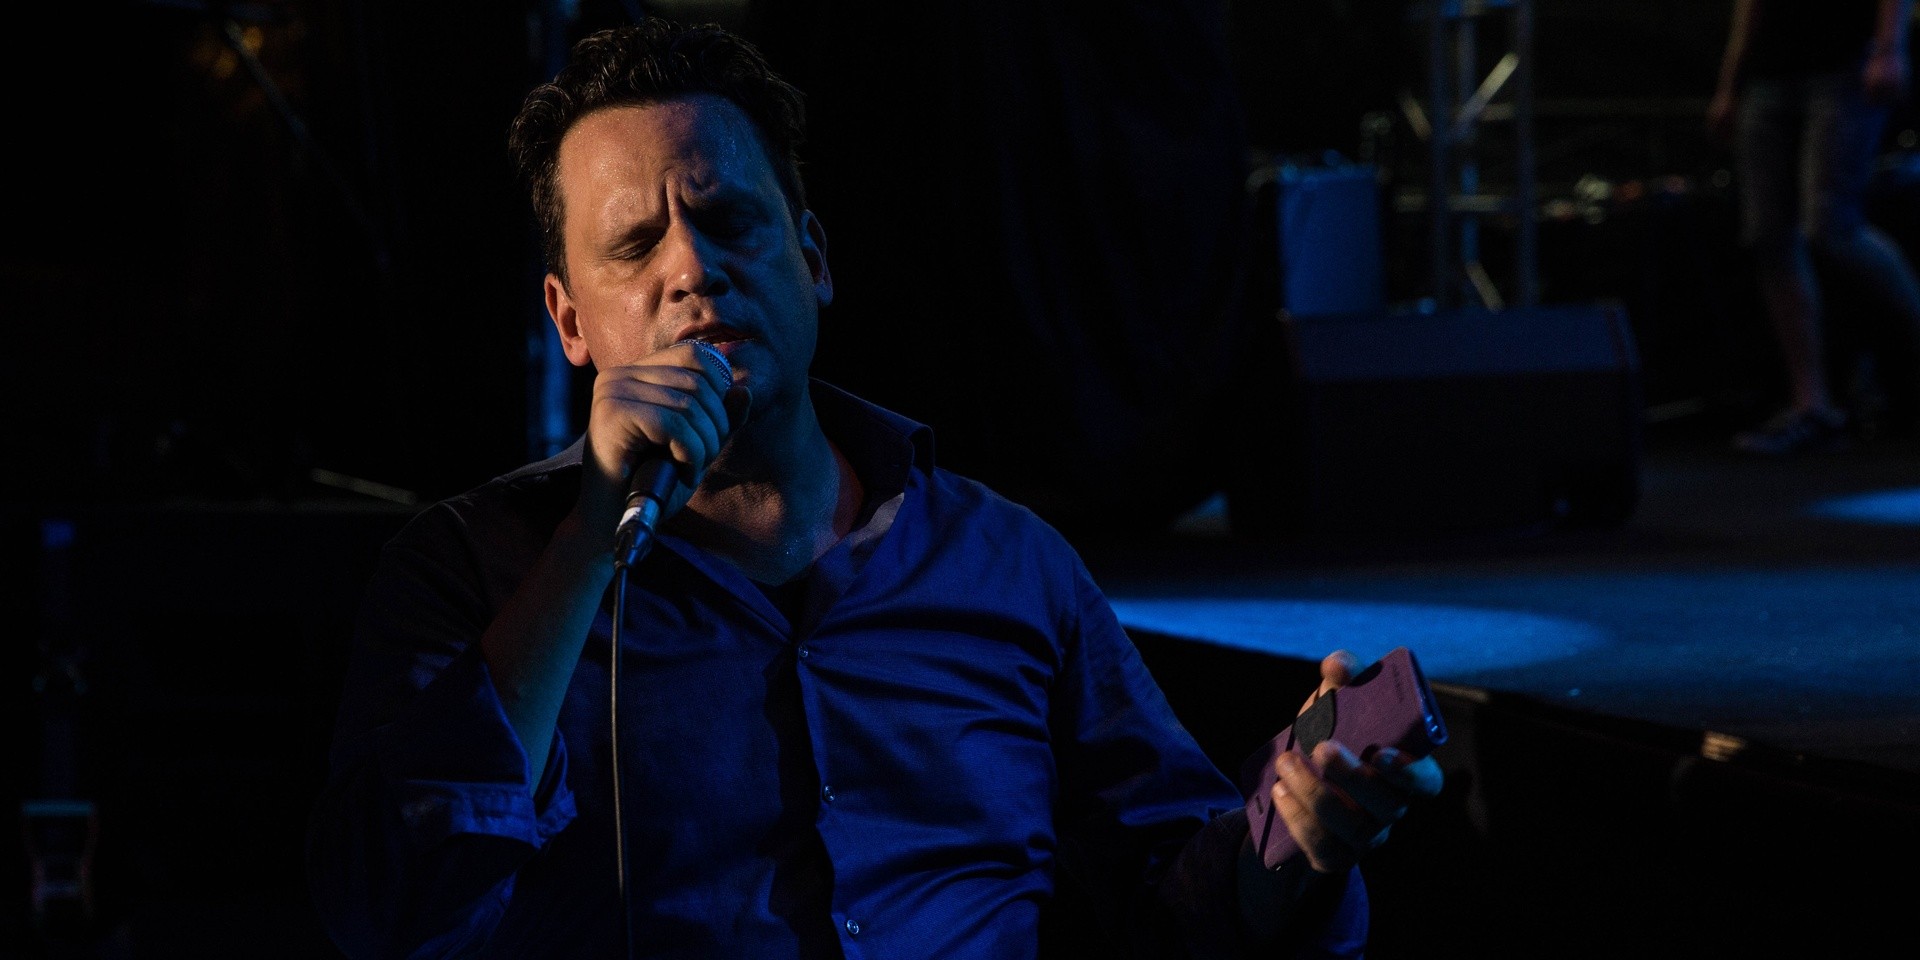 Sun Kil Moon wrote a song about a letter by a Singaporean fan